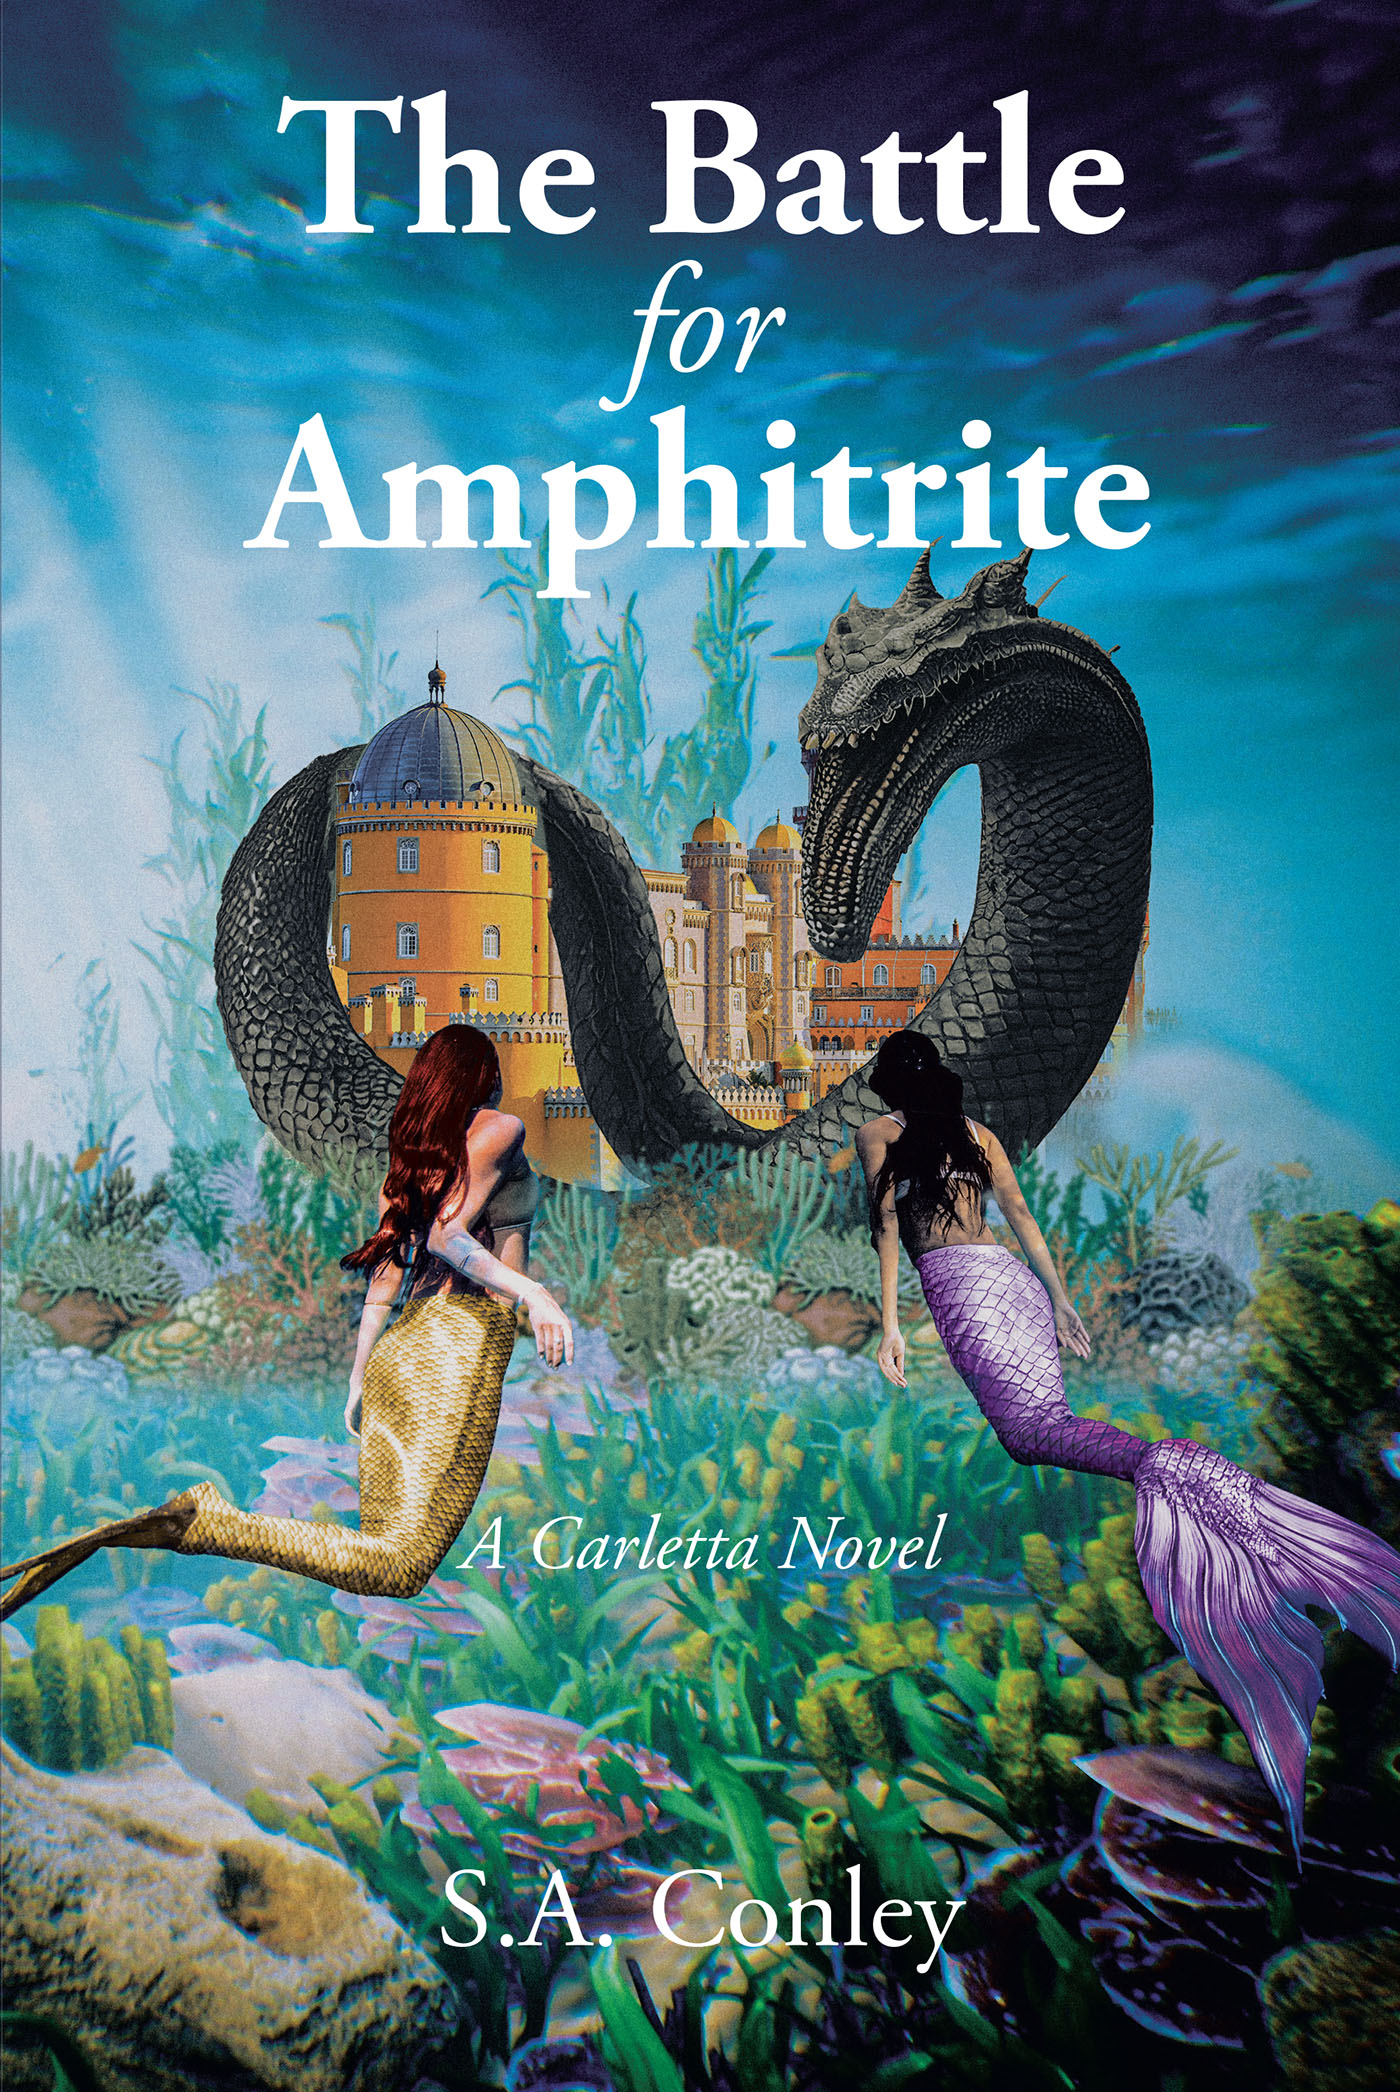 Author S.A. Conley’s New Book, "The Battle for Amphitrite: A Carletta Novel," Follows a Brave Queen as She Tries to Stop a Powerful Enemy from Destroying Her Home